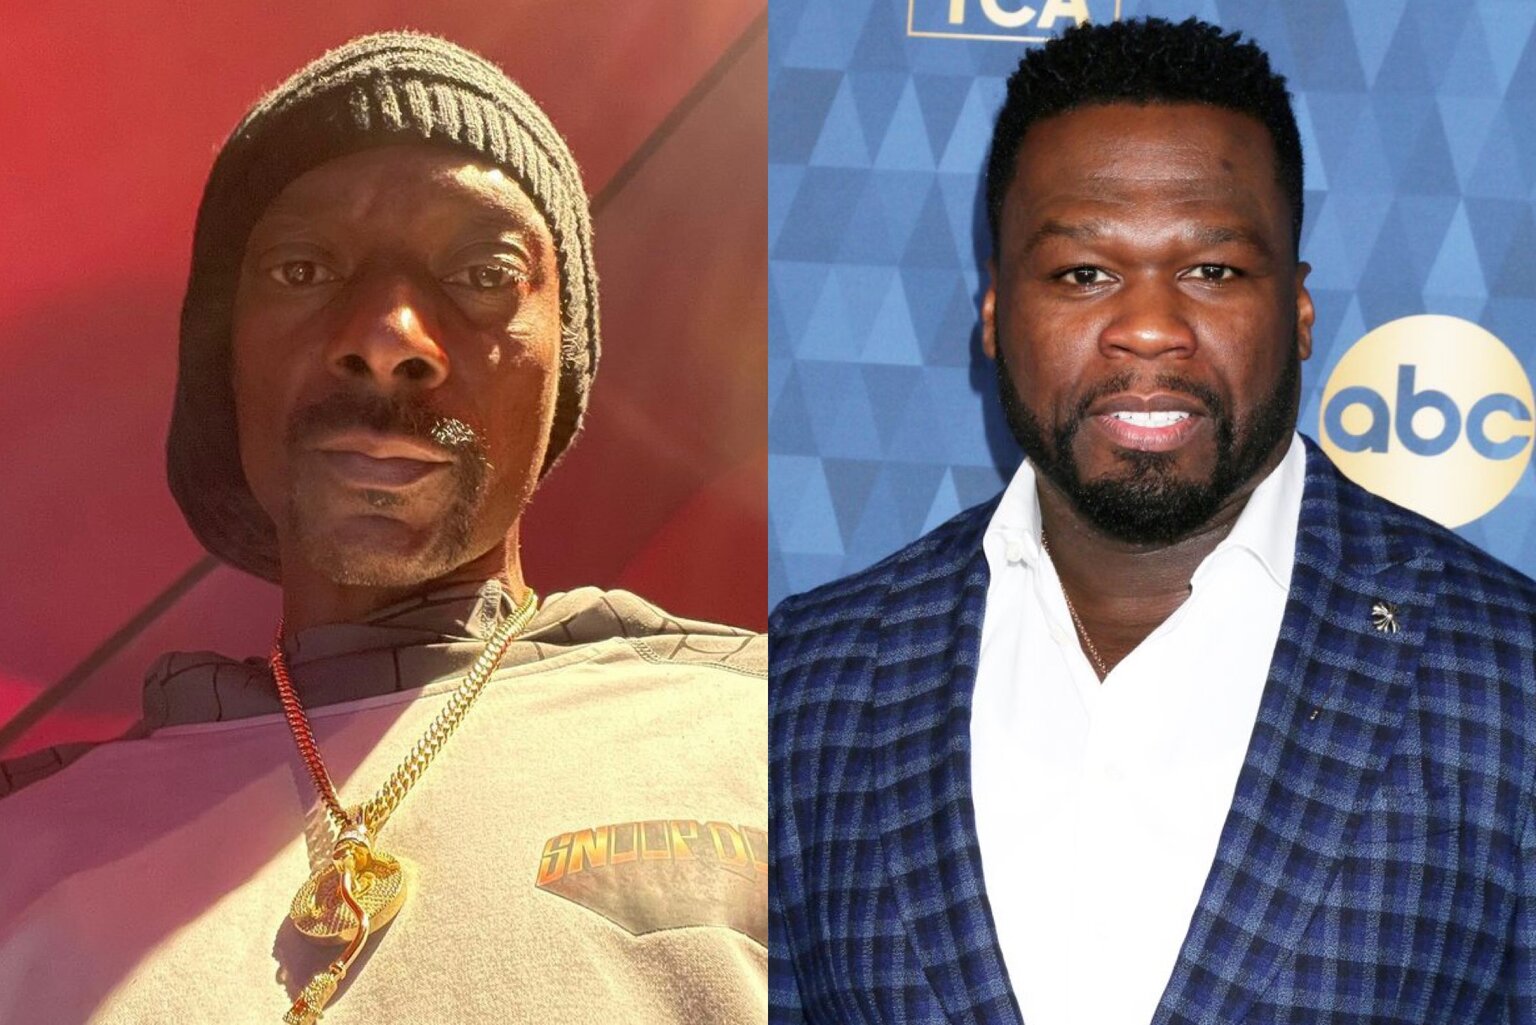 Snoop Dogg Joins 50 Cent in #EmmysSoWhite Outrage After No Actors of Color Win in Major Categories